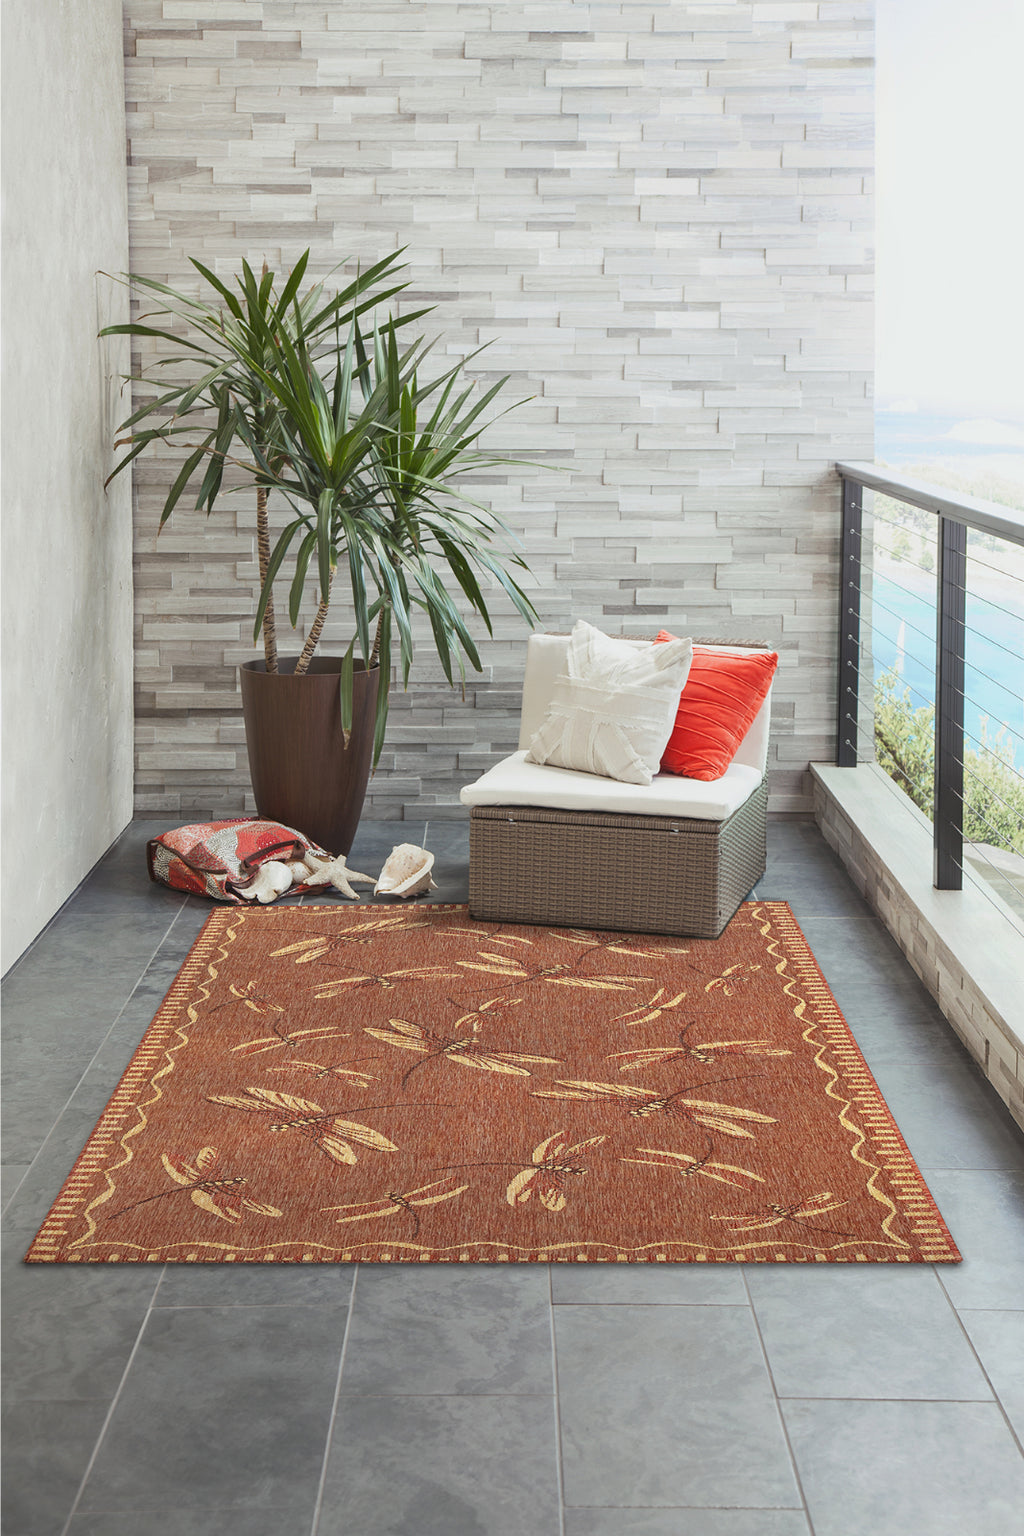 Trans Ocean Carmel 8440/24 Dragonfly Red Area Rug by Liora Manne Room Scene Image Feature